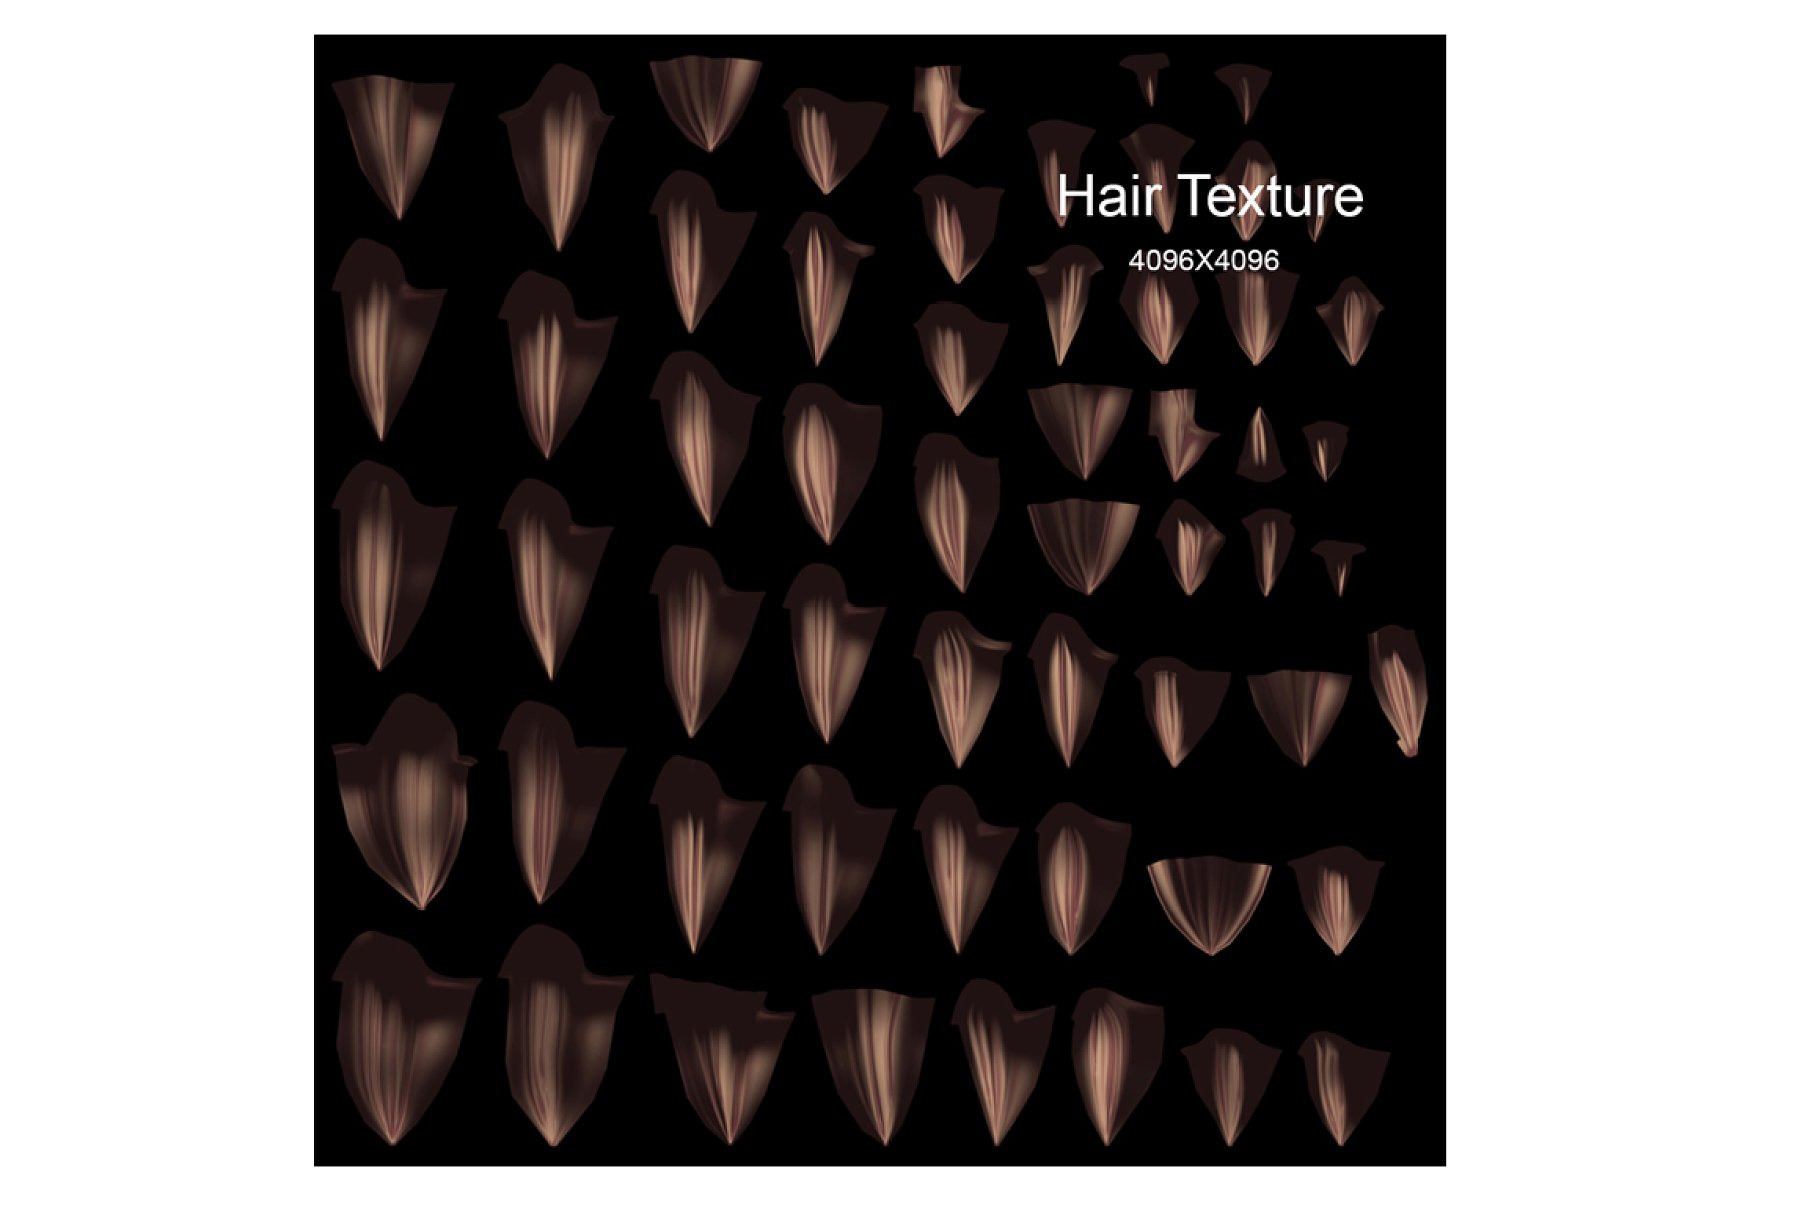 Hair diffuse images.